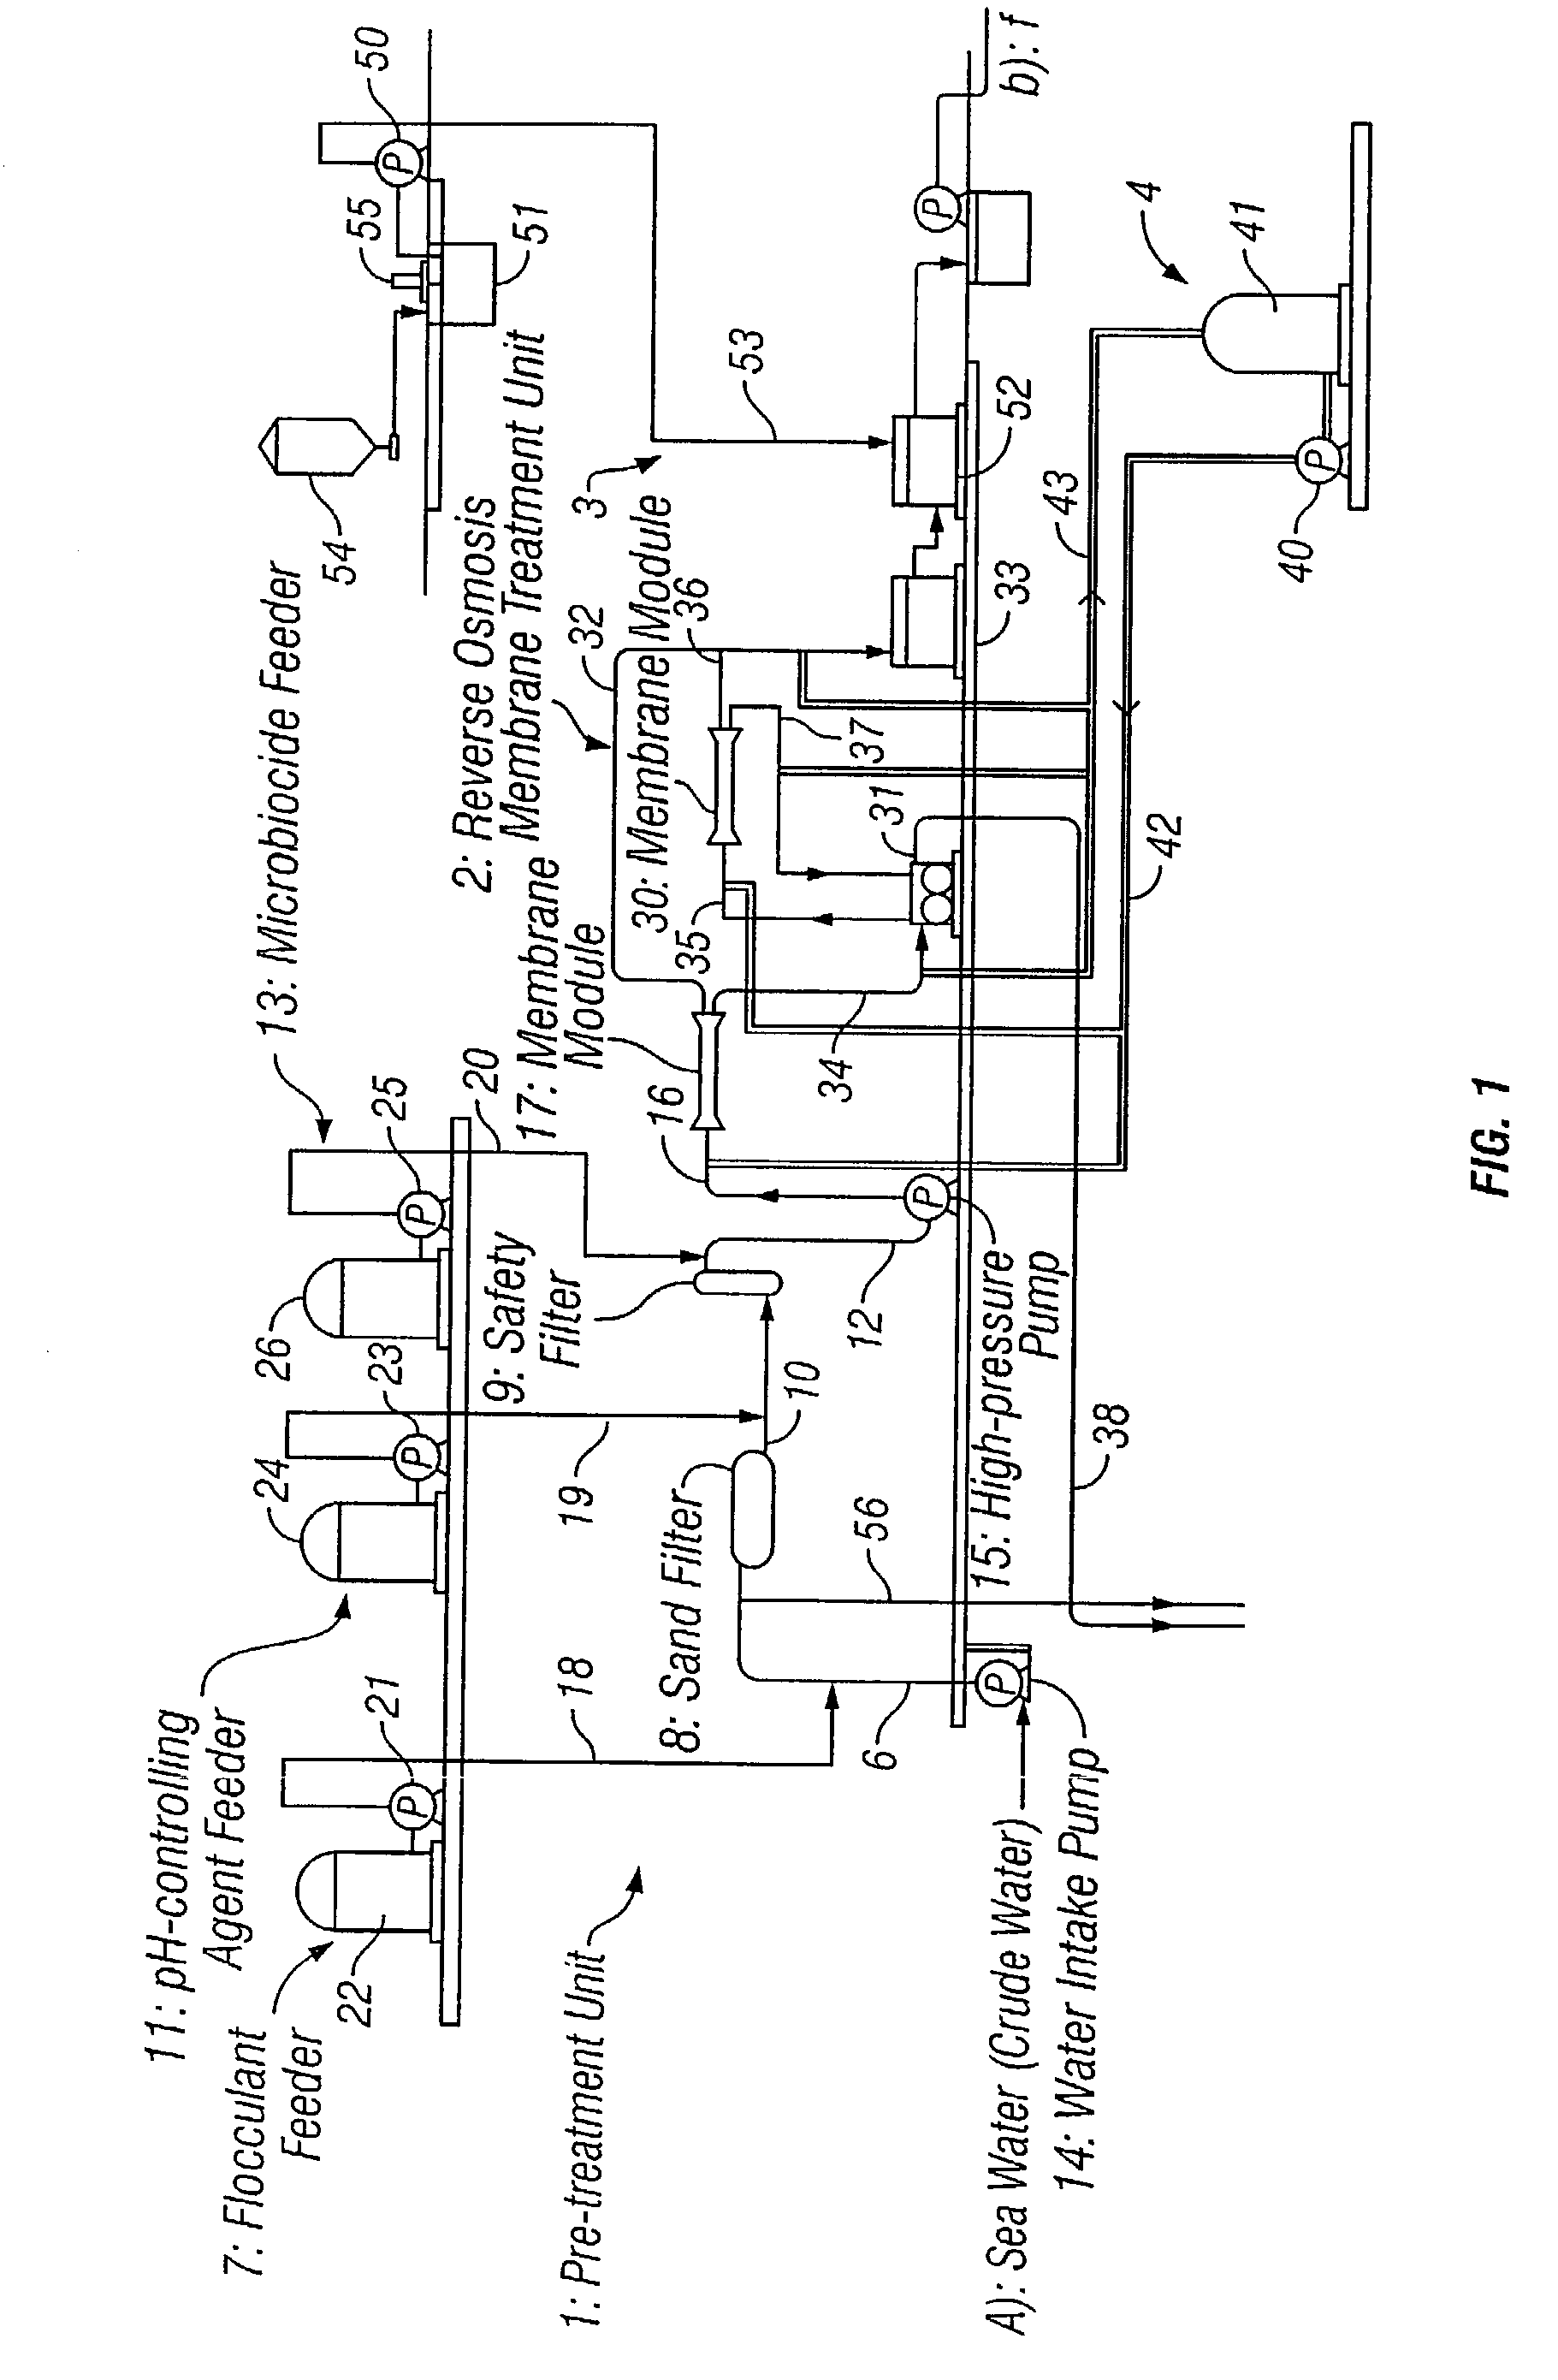 Method of bacteriostasis or disinfection for permselective membrane